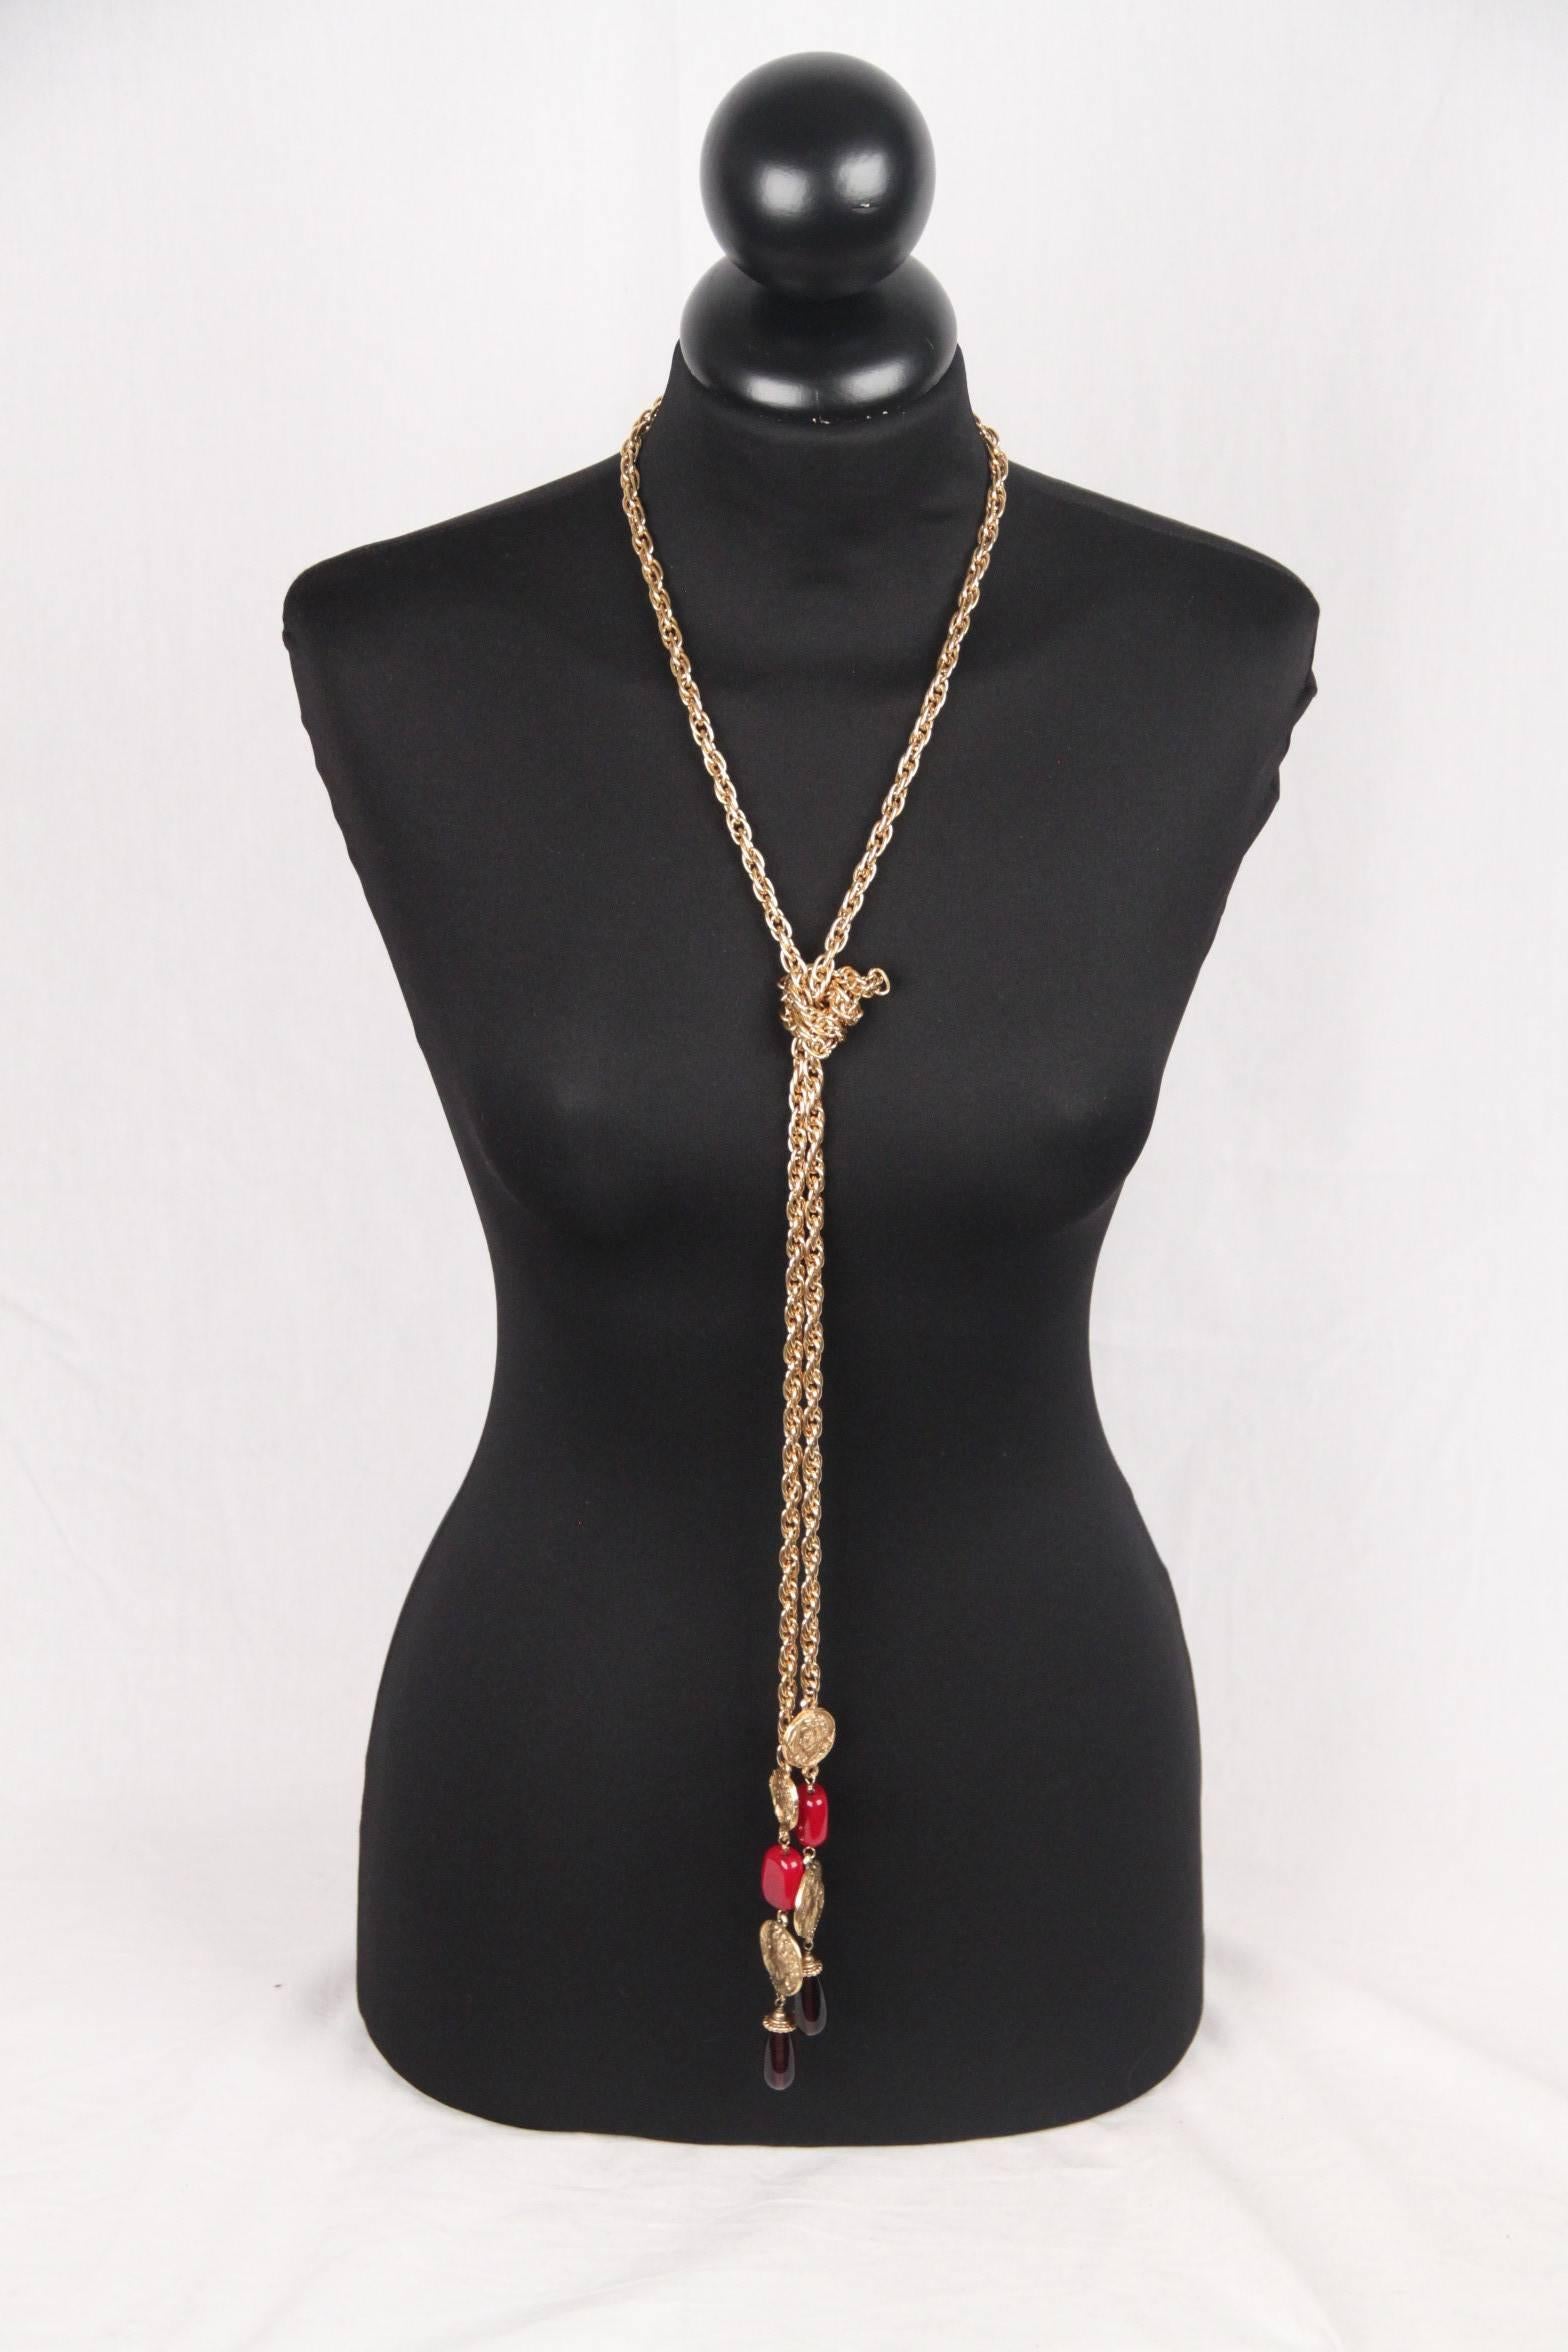 
- Period/ Era: Circa 1971-1980
- Long tie up necklace / Cravatte design
- Gold metal chain finished by embossed medals with embossed heads on a side and CHANEL logo & signature on the other side
- Red and mauve glass beads
- Can be worn in 2